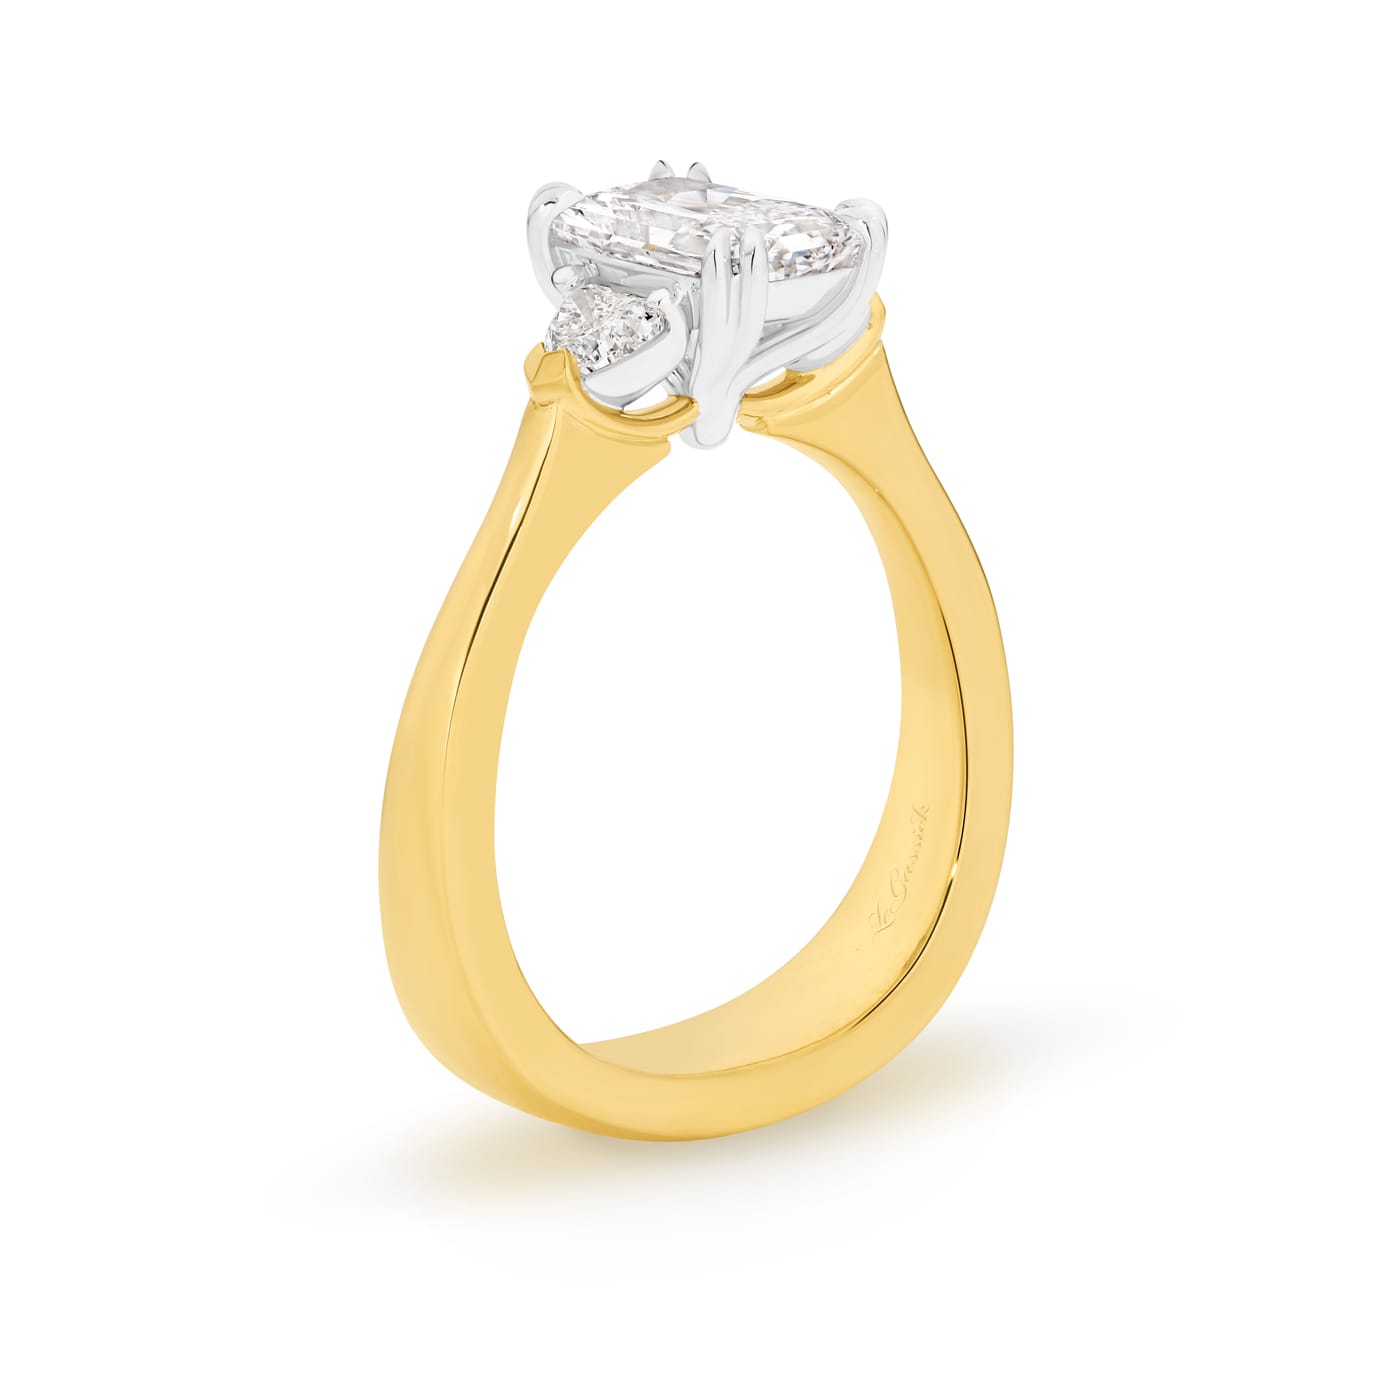 Sierra features a 1.50ct GIA Certified long radiant cut centre diamond, beautifully proportioned on either side with 2 heart shaped diamonds totalling 0.34ct. Handcrafted in 18ct yellow and white gold, she was designed and handcrafted by LeGassick's Master Jewellers, Gold Coast, Australia.